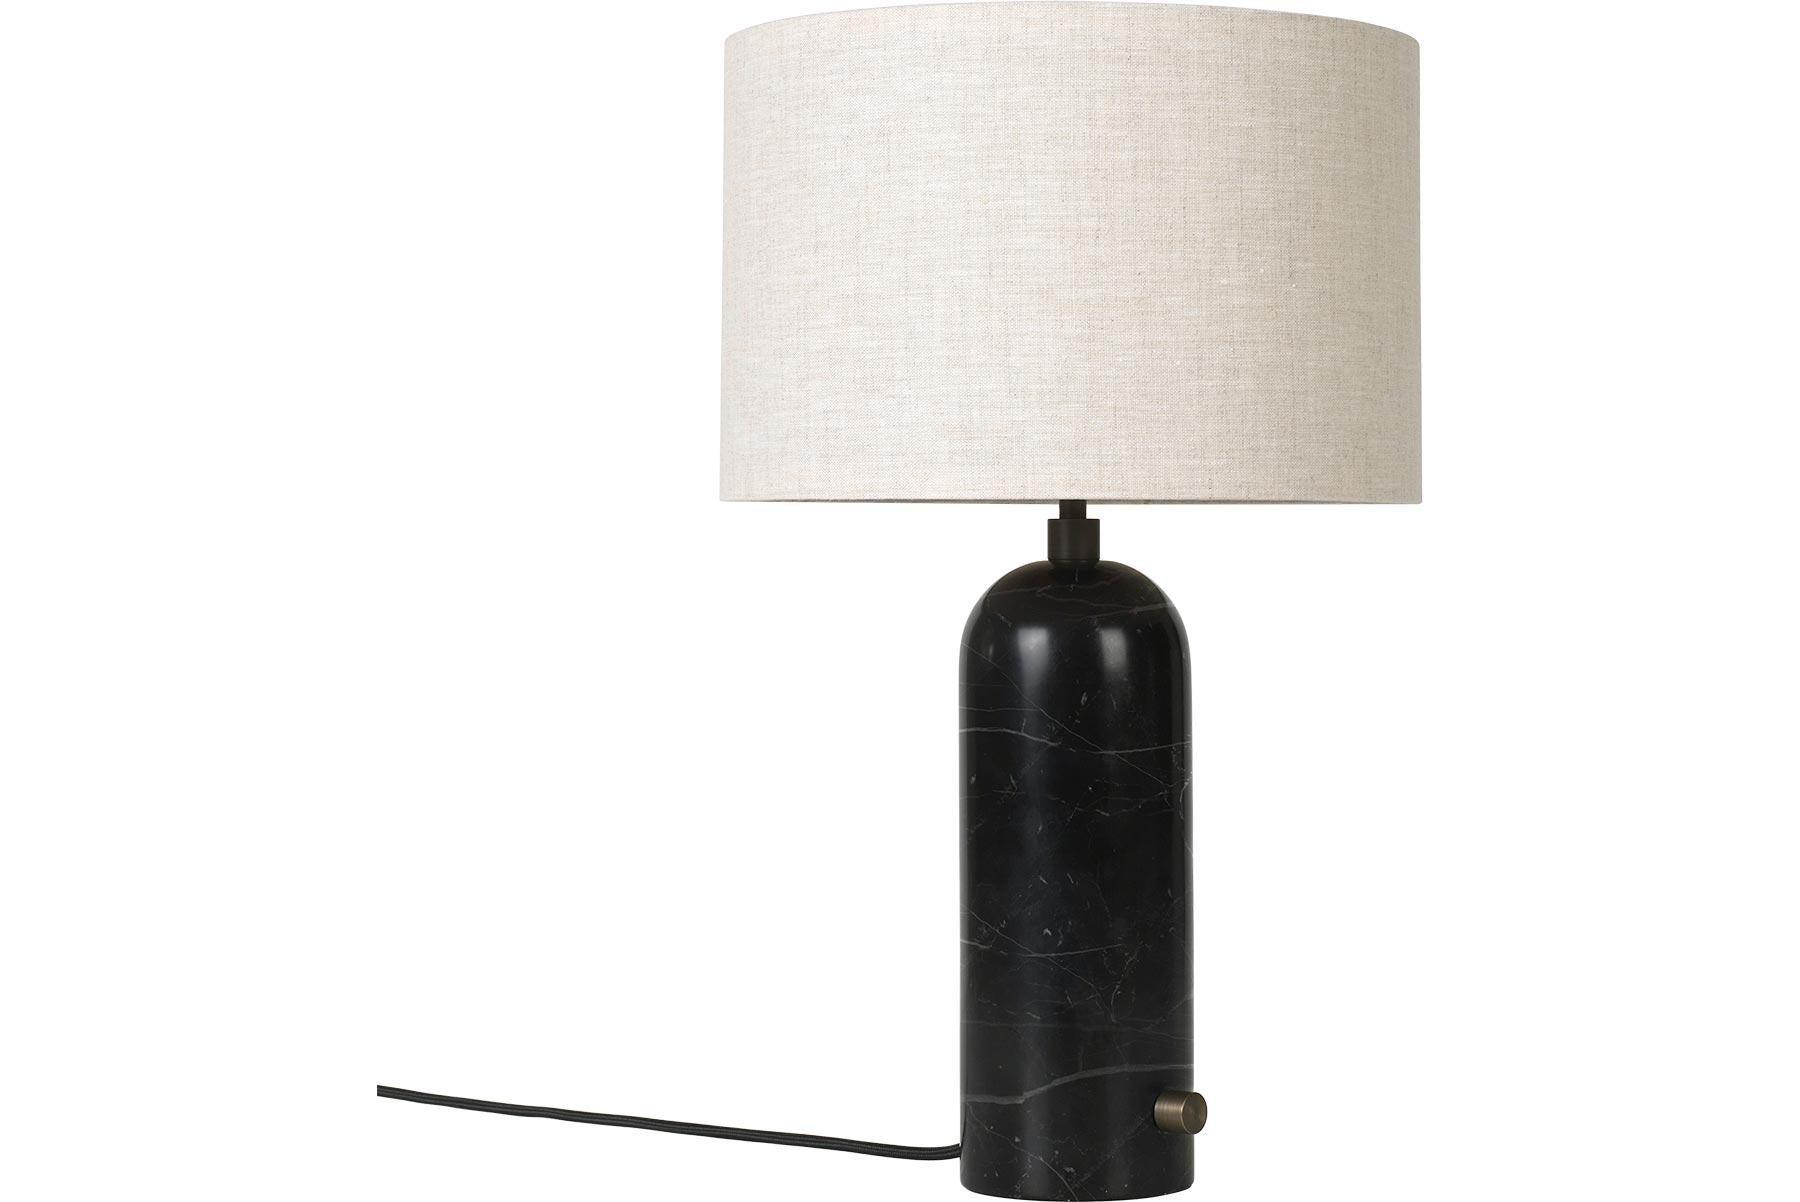 Steel Gravity Table Lamp - Small, Grey Marble, White. For Sale